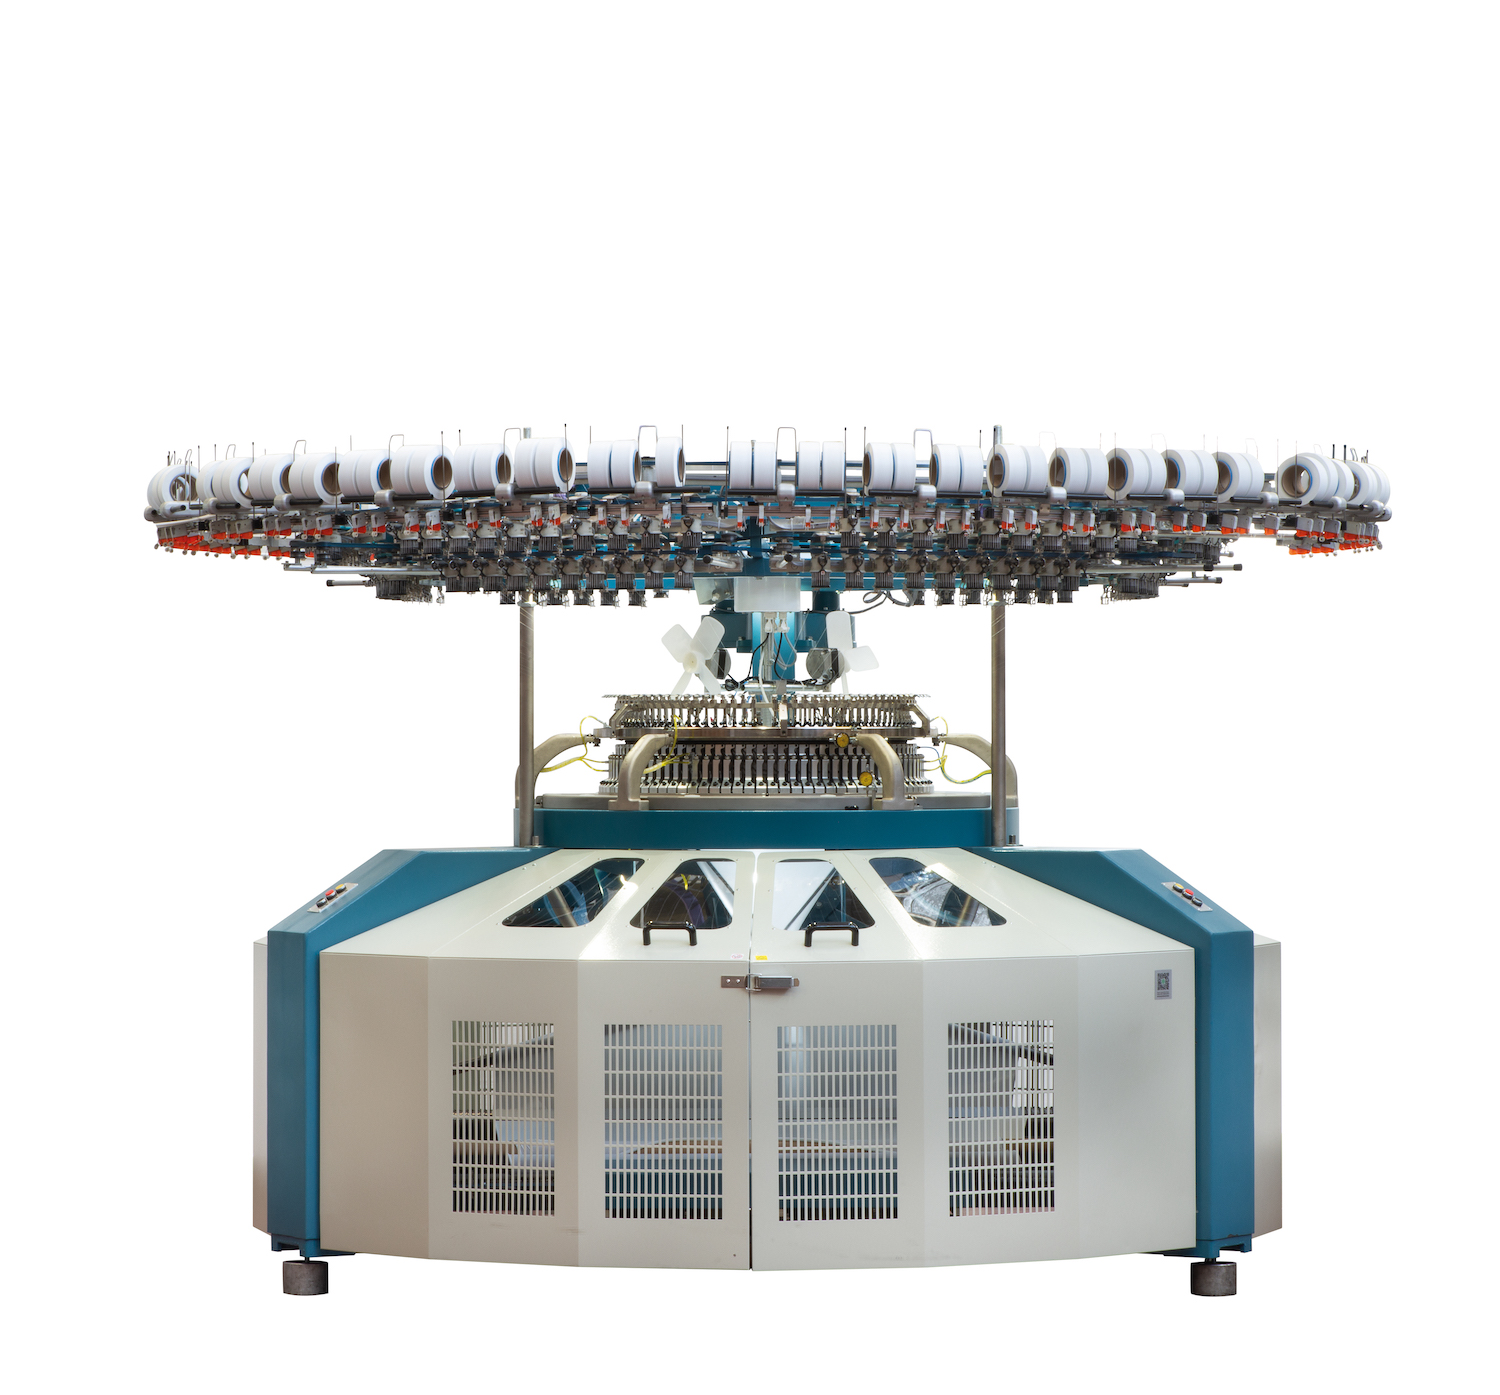 INNOTAS, a single jersey machine with 3 feeders per inch, capable of knitting up to 4 track structures. © Santoni Spa